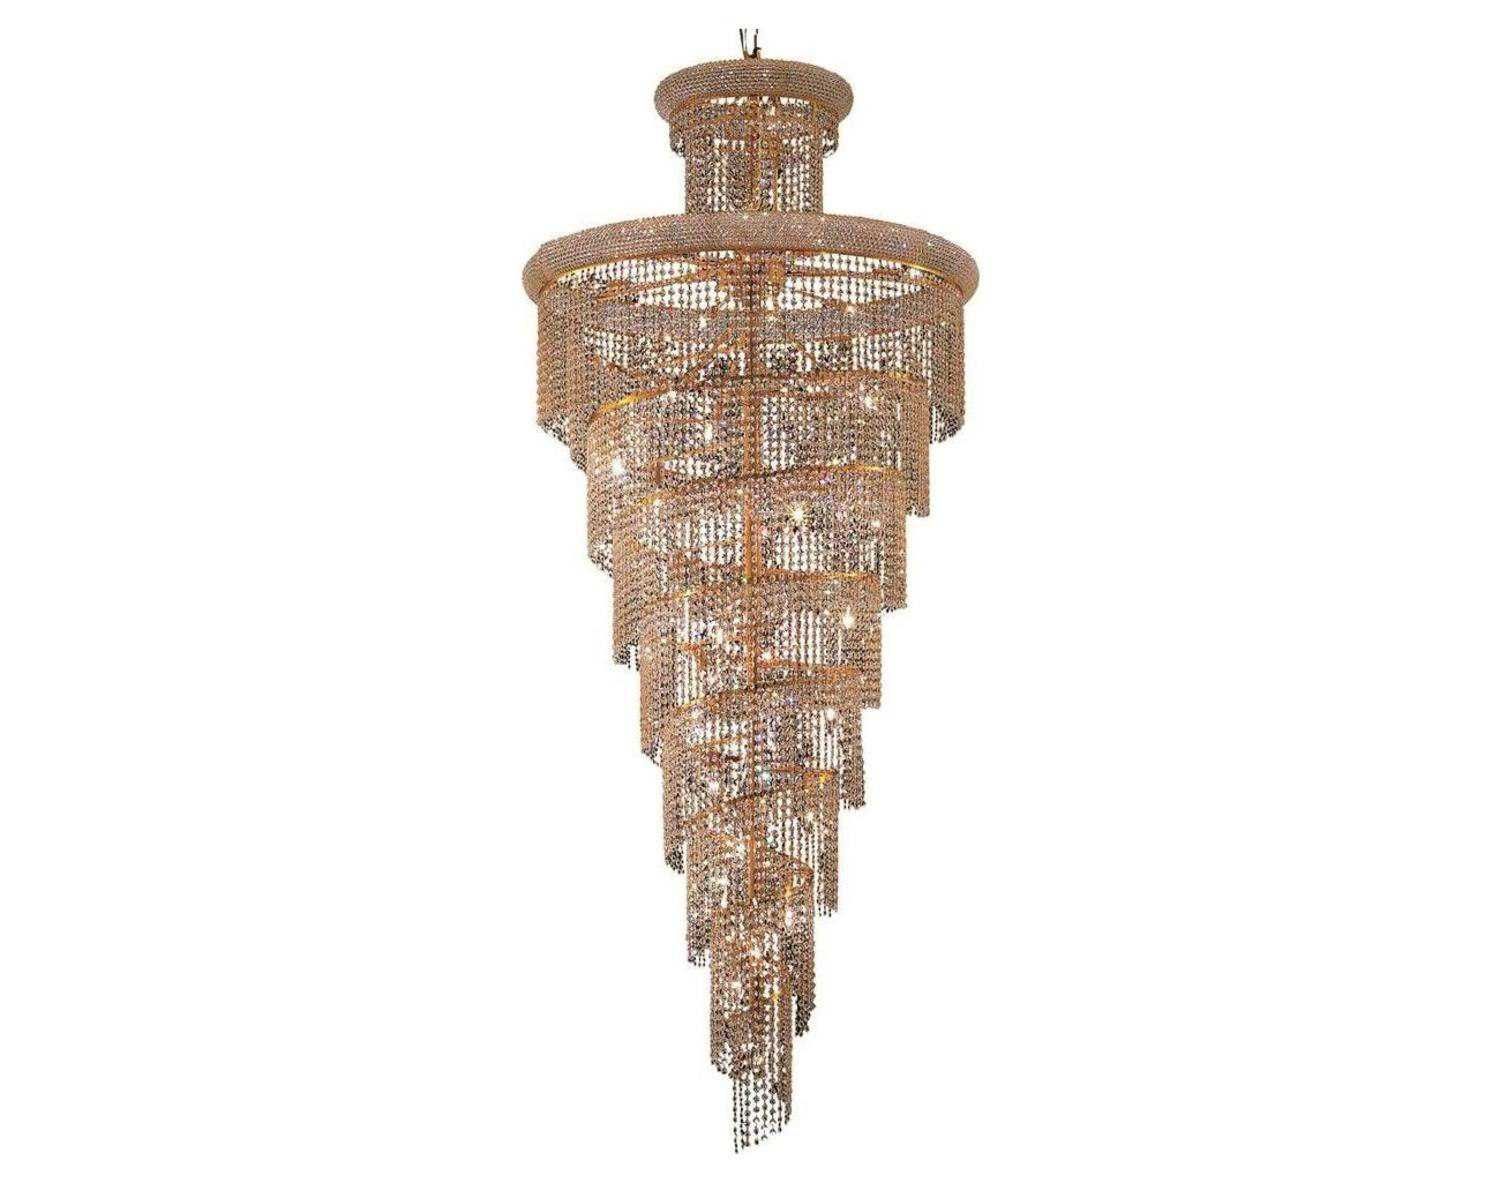 Elegant Lighting Spiral Royal Cut Gold & Crystal 32 Light Throughout Royal Cut Crystal Chandeliers (View 13 of 15)